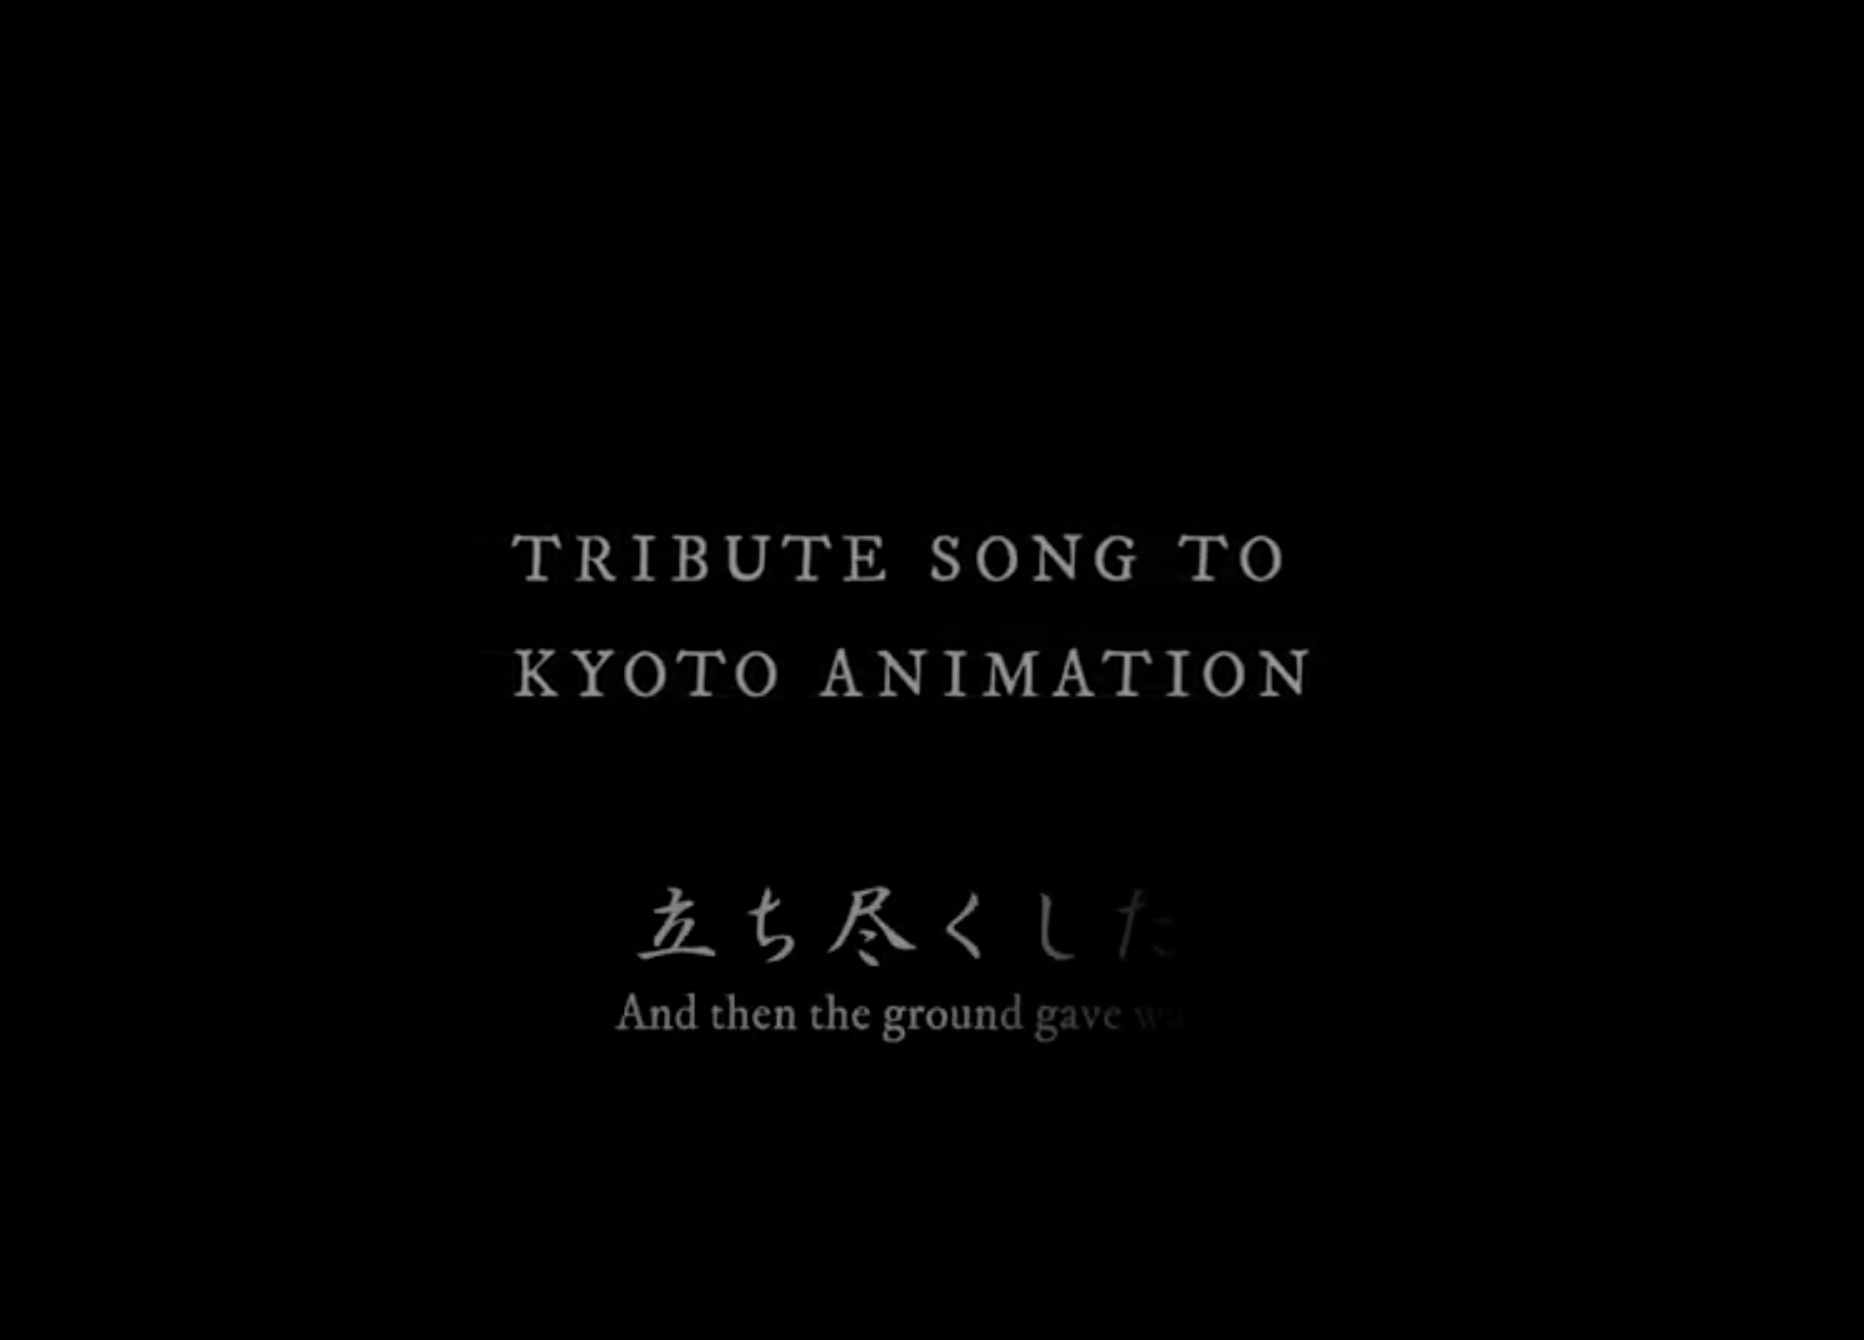 A Requiem For Kyoto Animation (KyoAni) | Japan Subculture Research Center